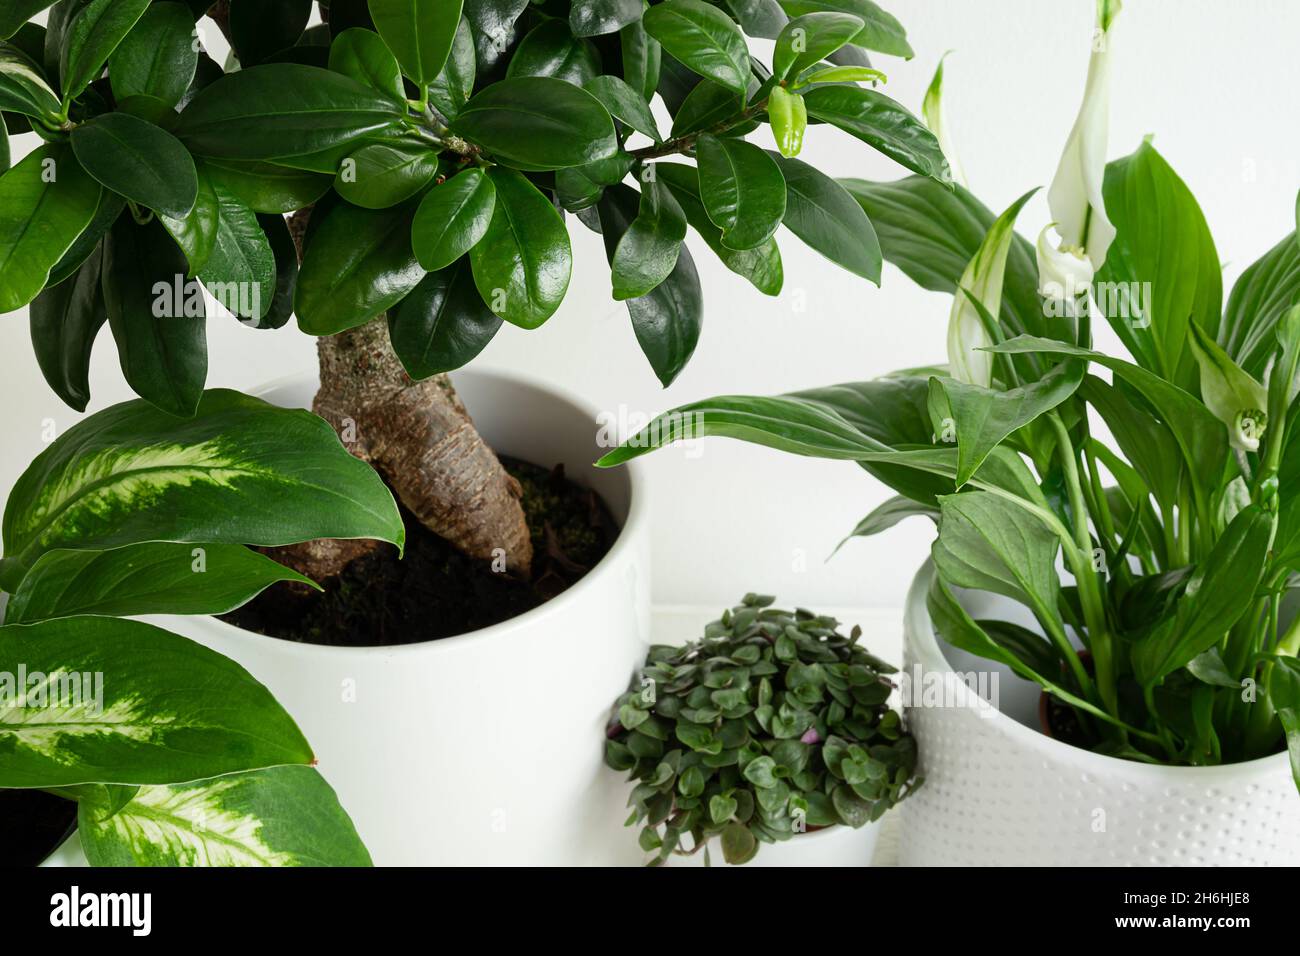 Young home plants close-up - dieffenbachia or dumb cane plant, ficus ginseng microcarpa, callisia and spathiphyllum in white pots, connecting with nat Stock Photo